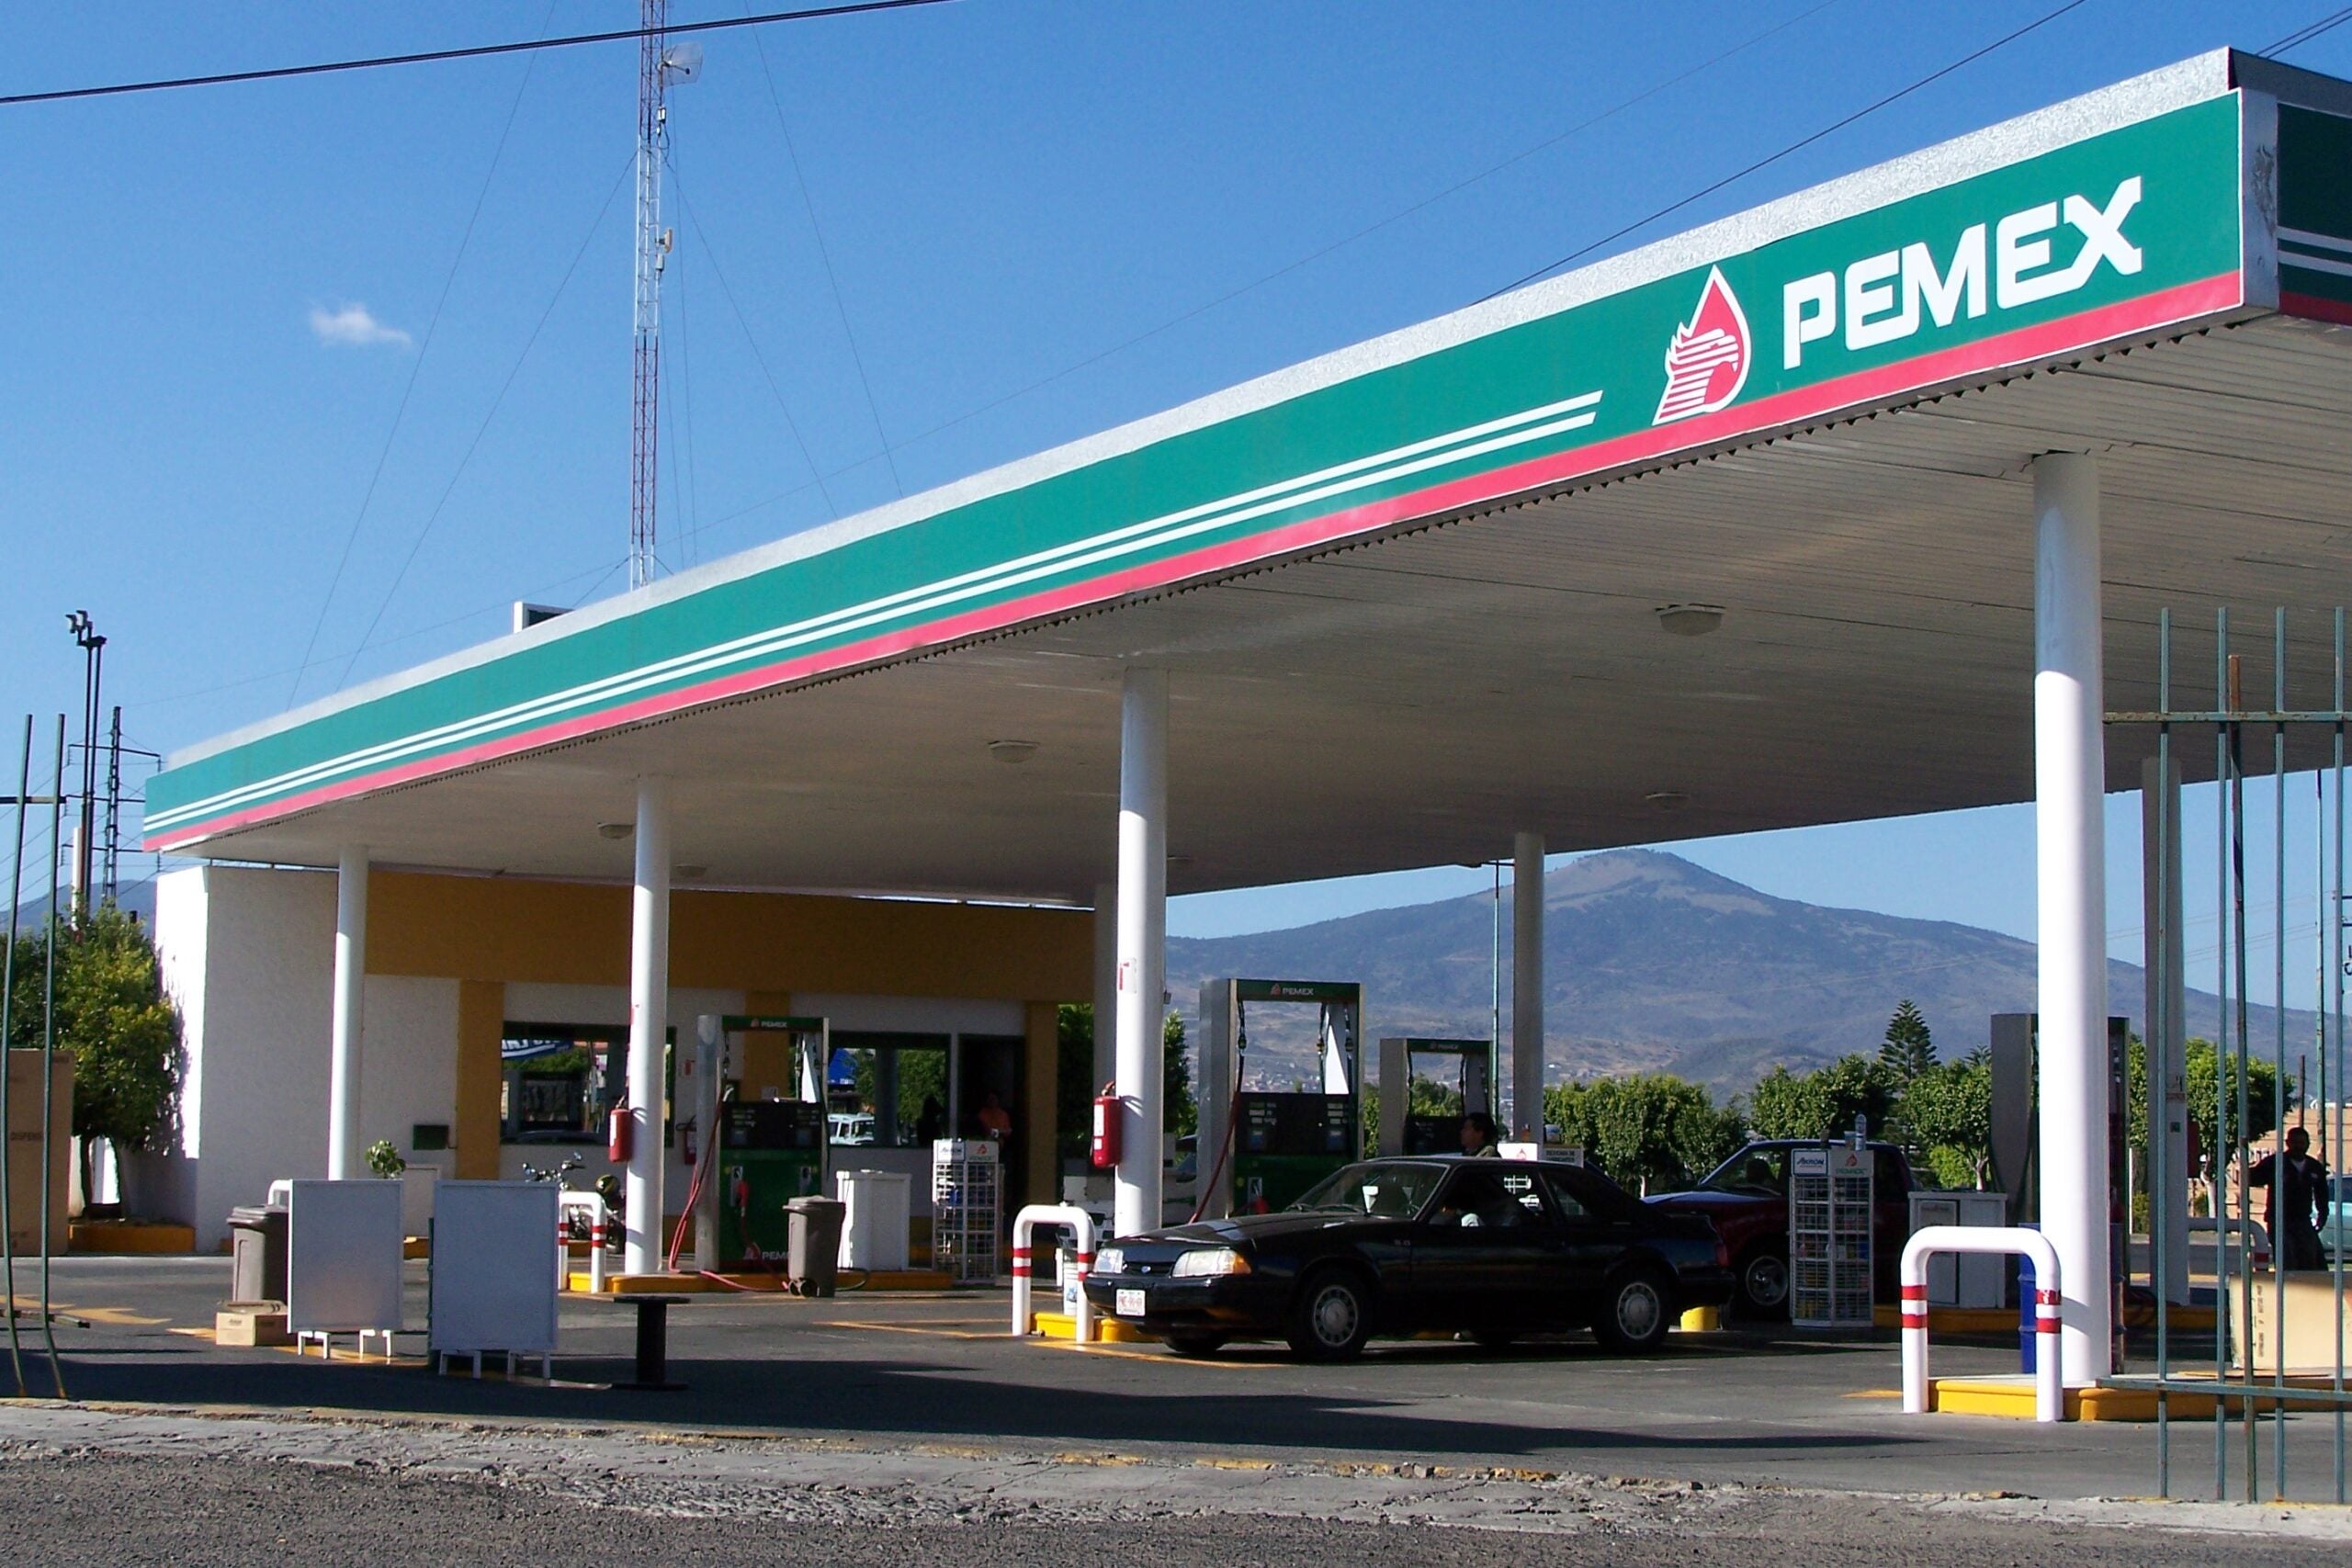 Mexico’s Pemex launches new subsidiary to sell petrochemical products